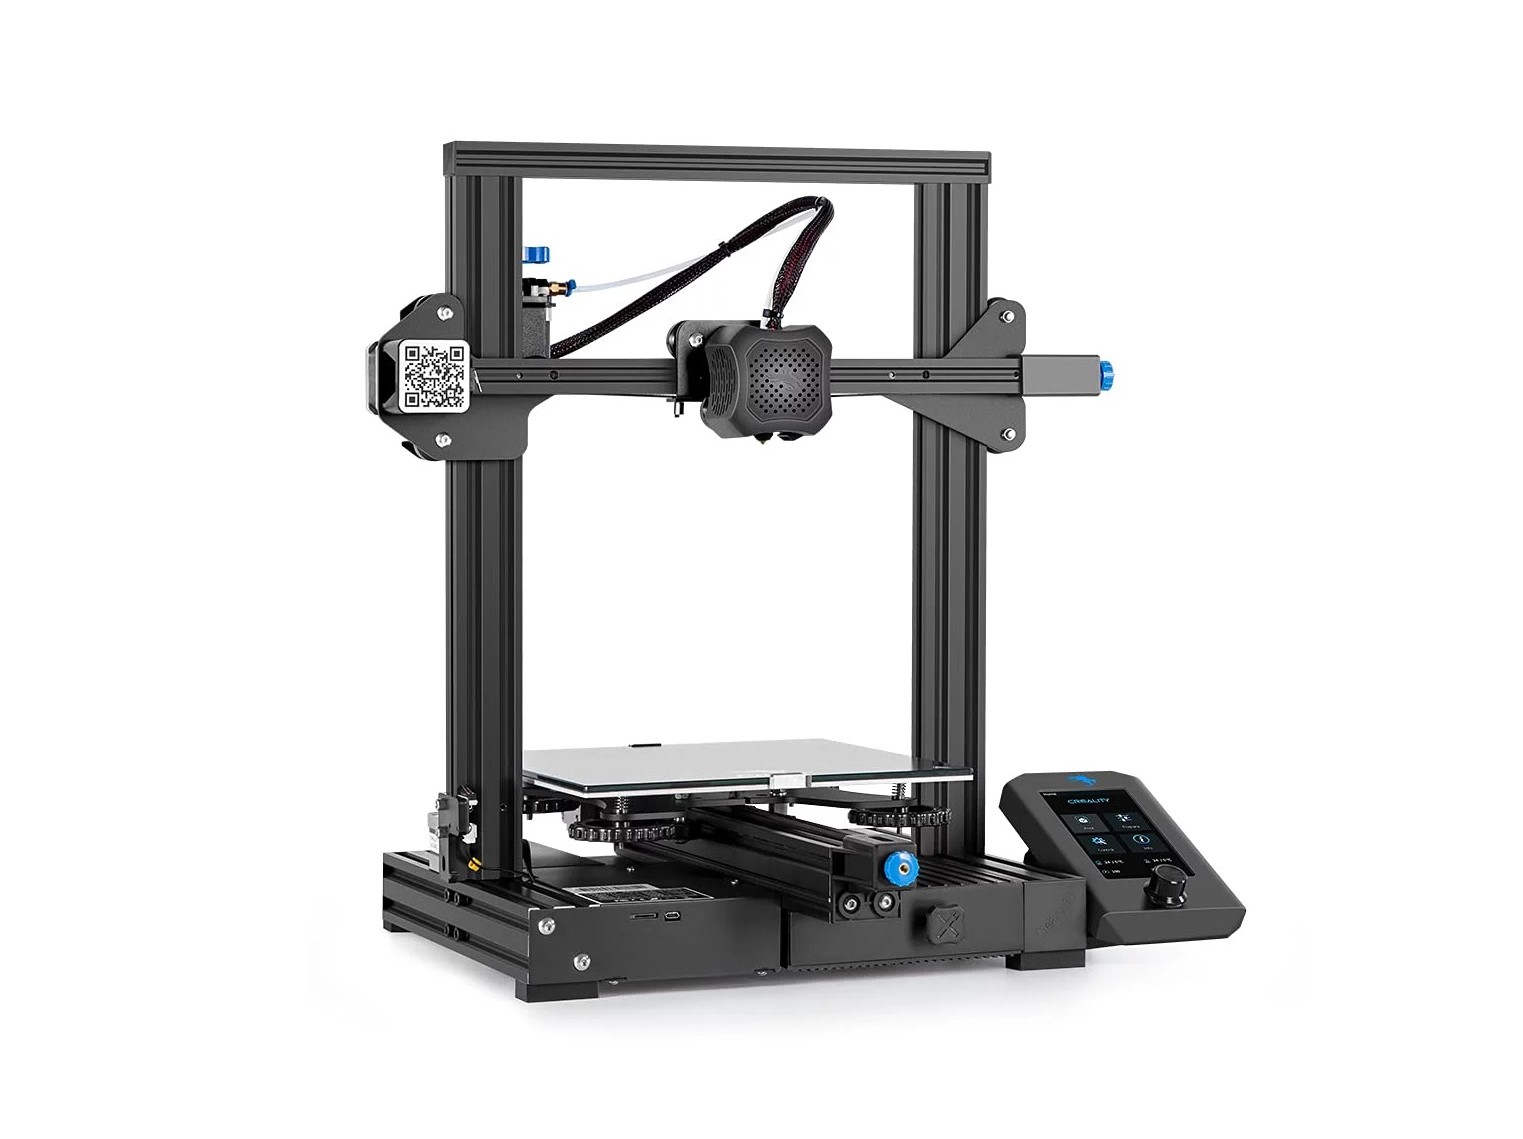 Creality Ender 3 V2 upgraded printer with smart screen.